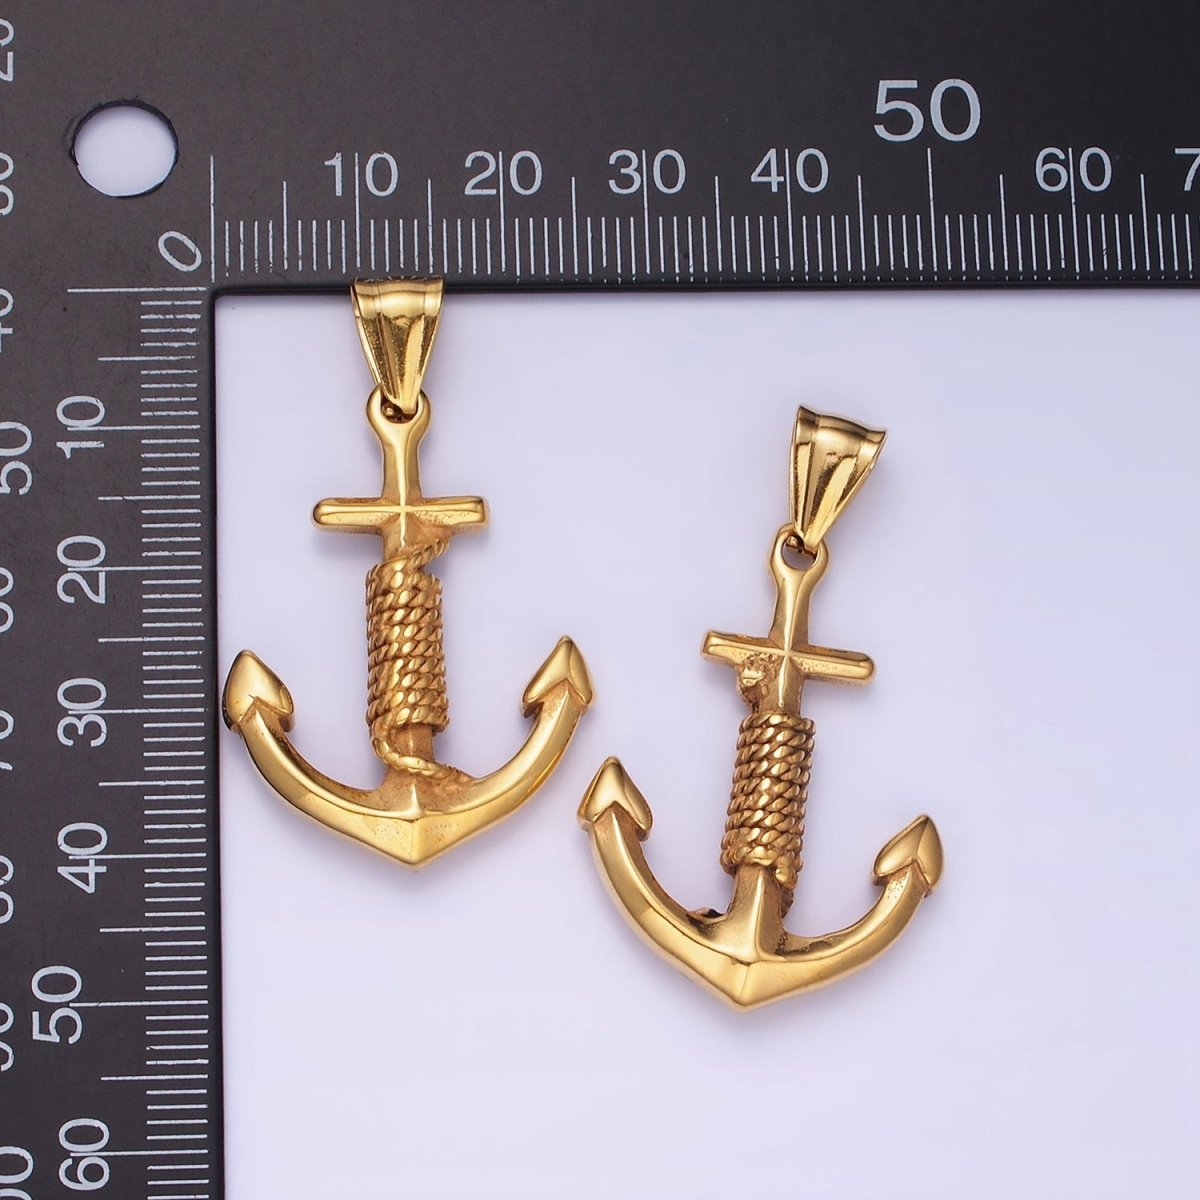 Big Nautical Charm Stainless Steel 42mm Anchor With Rope Pendant Christian Religious Jewelry Making Supply | P-1194 - DLUXCA